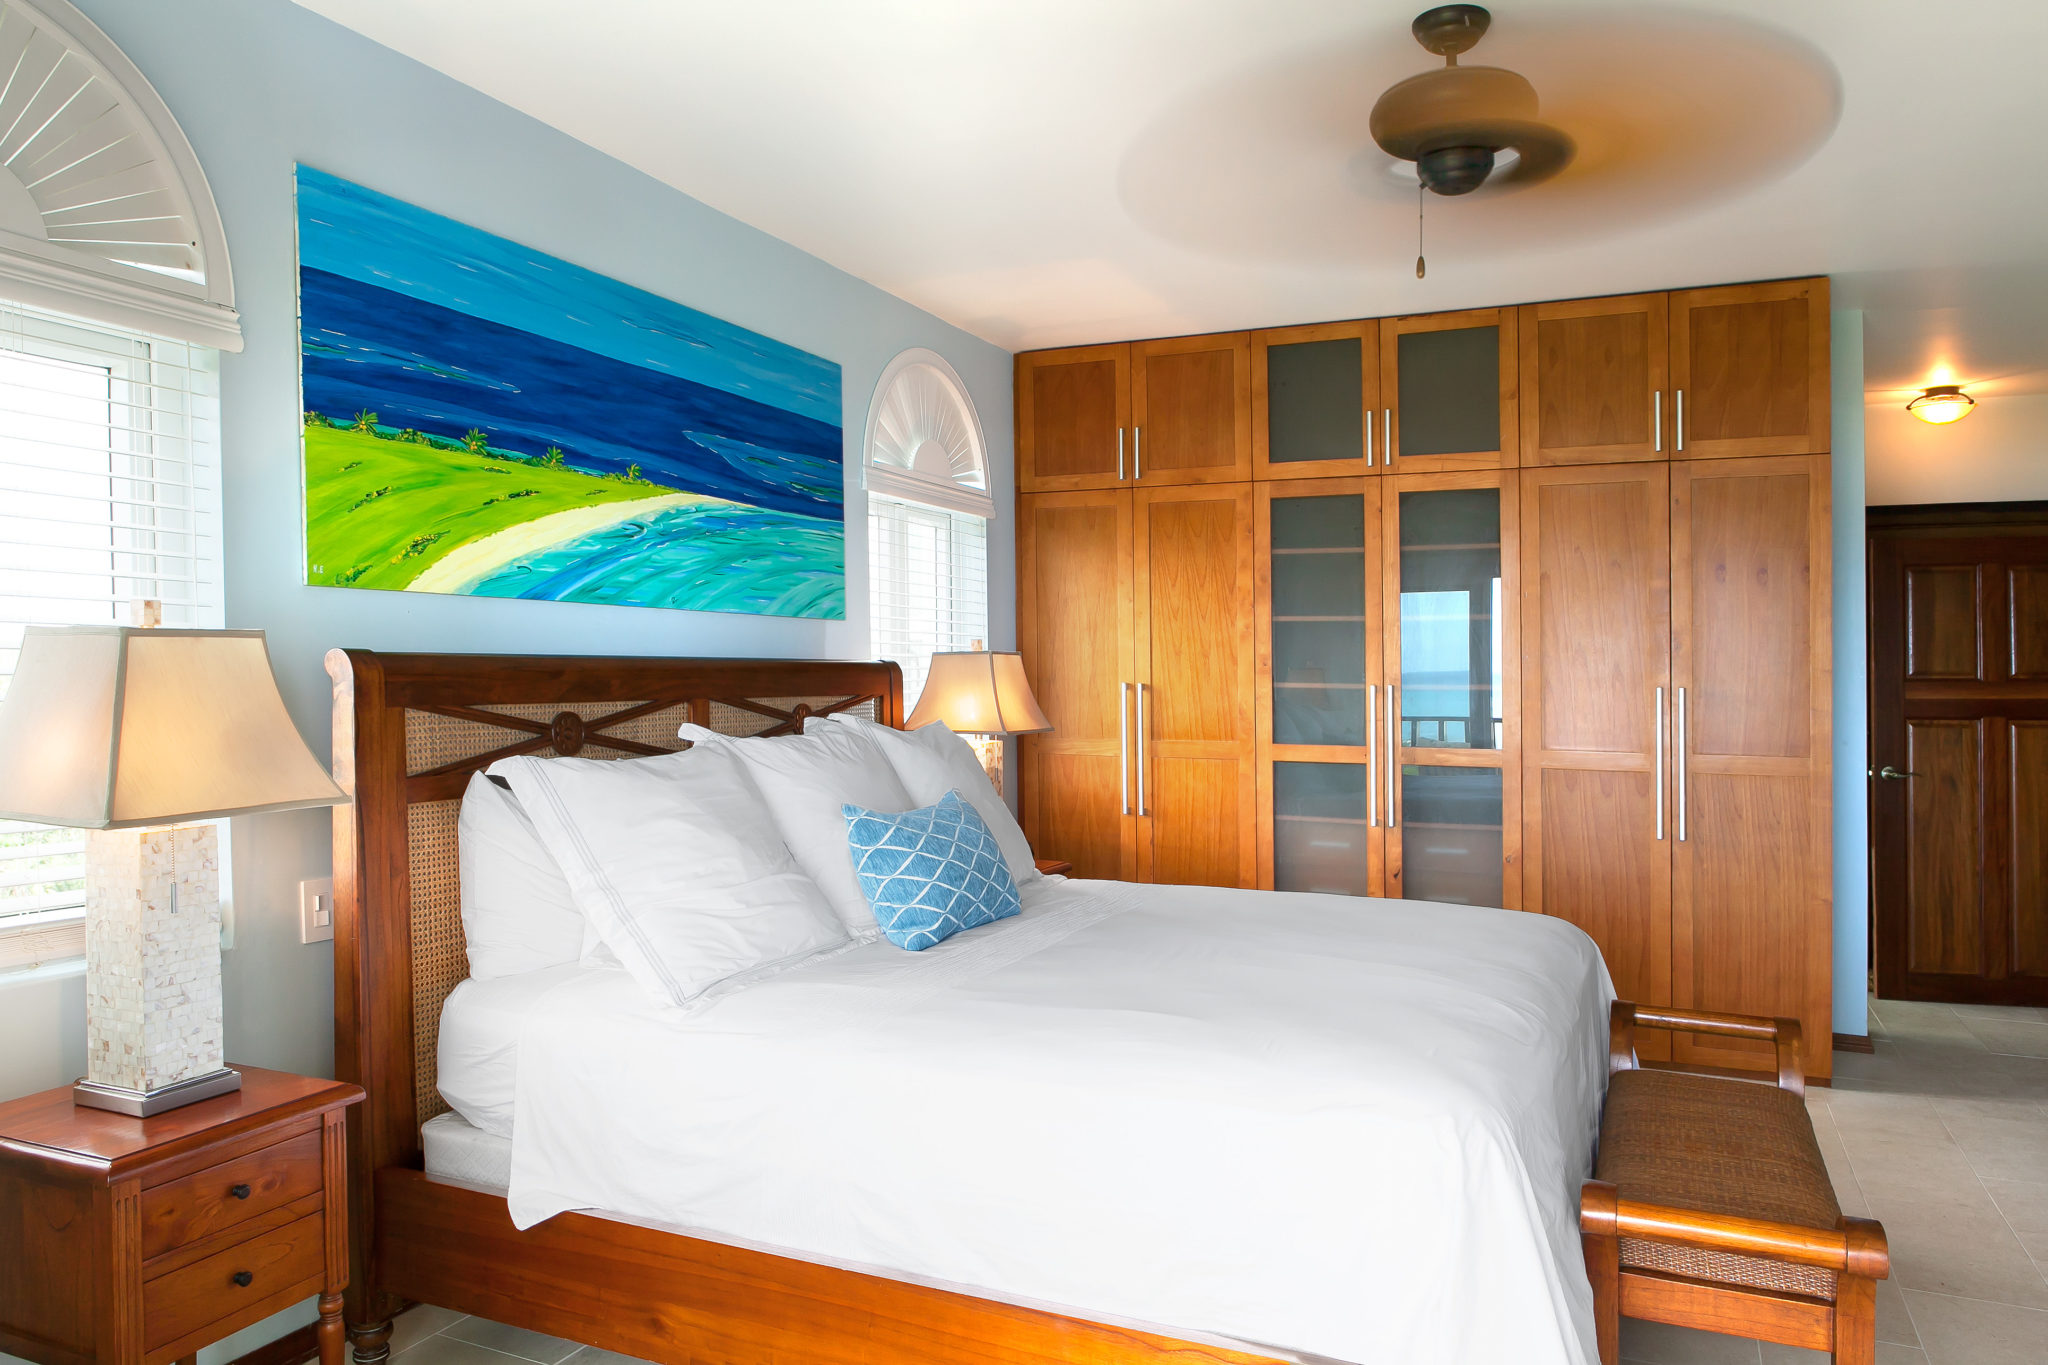 One of the bedrooms inside of vacation rentals in anguilla